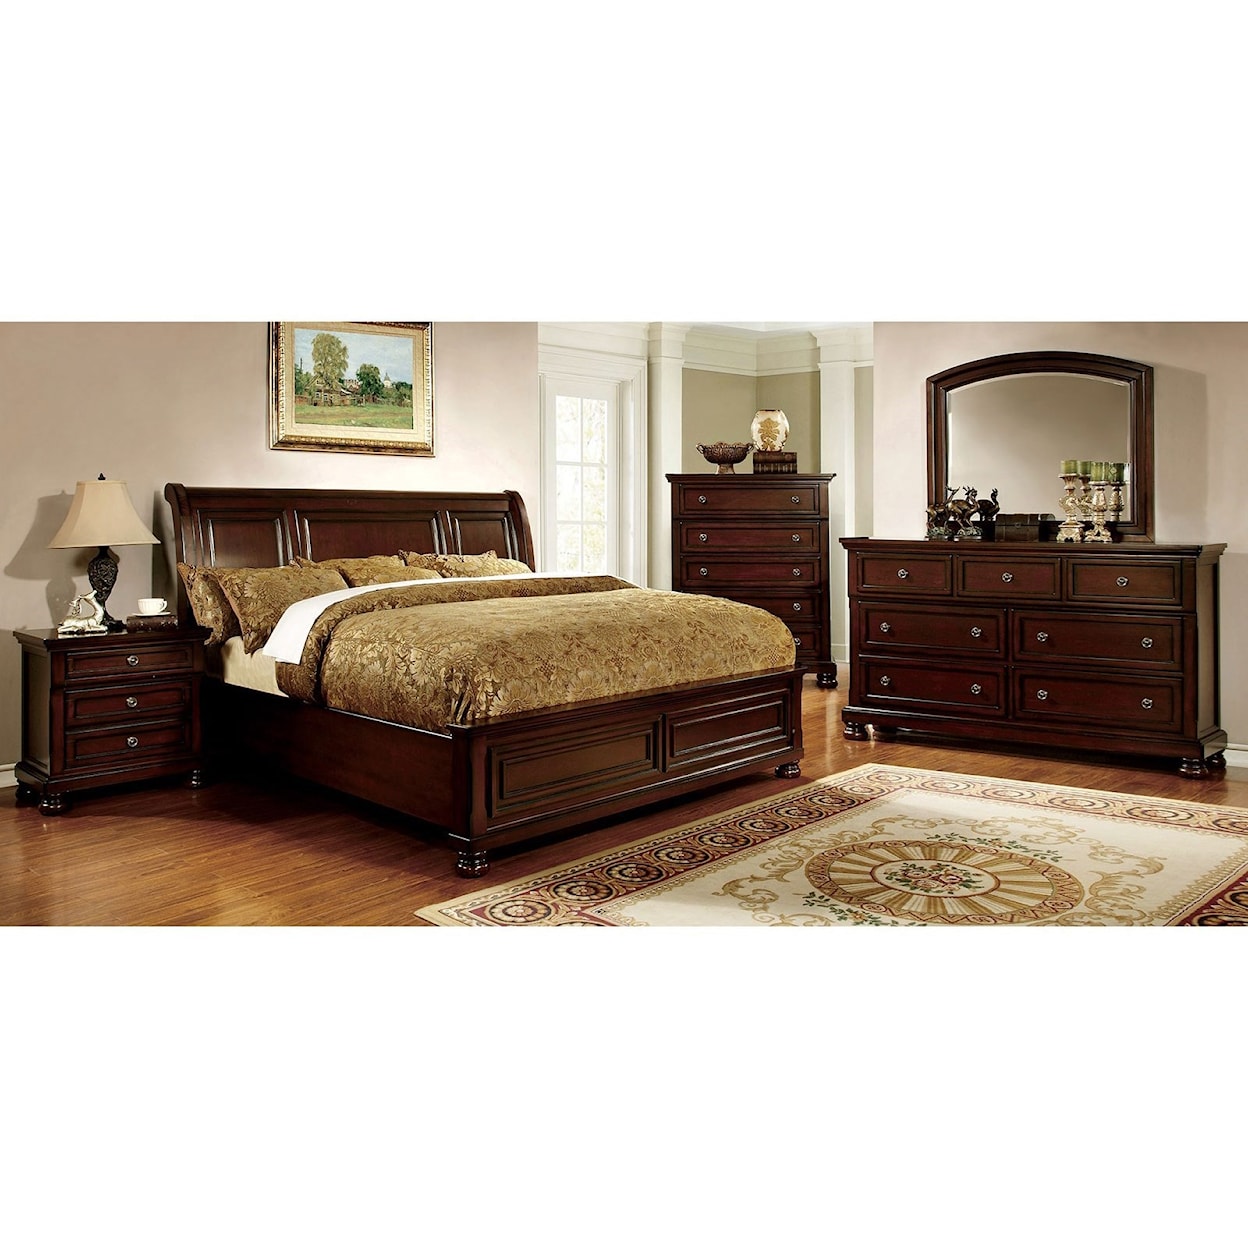 Furniture of America Northville Cal.King Bed